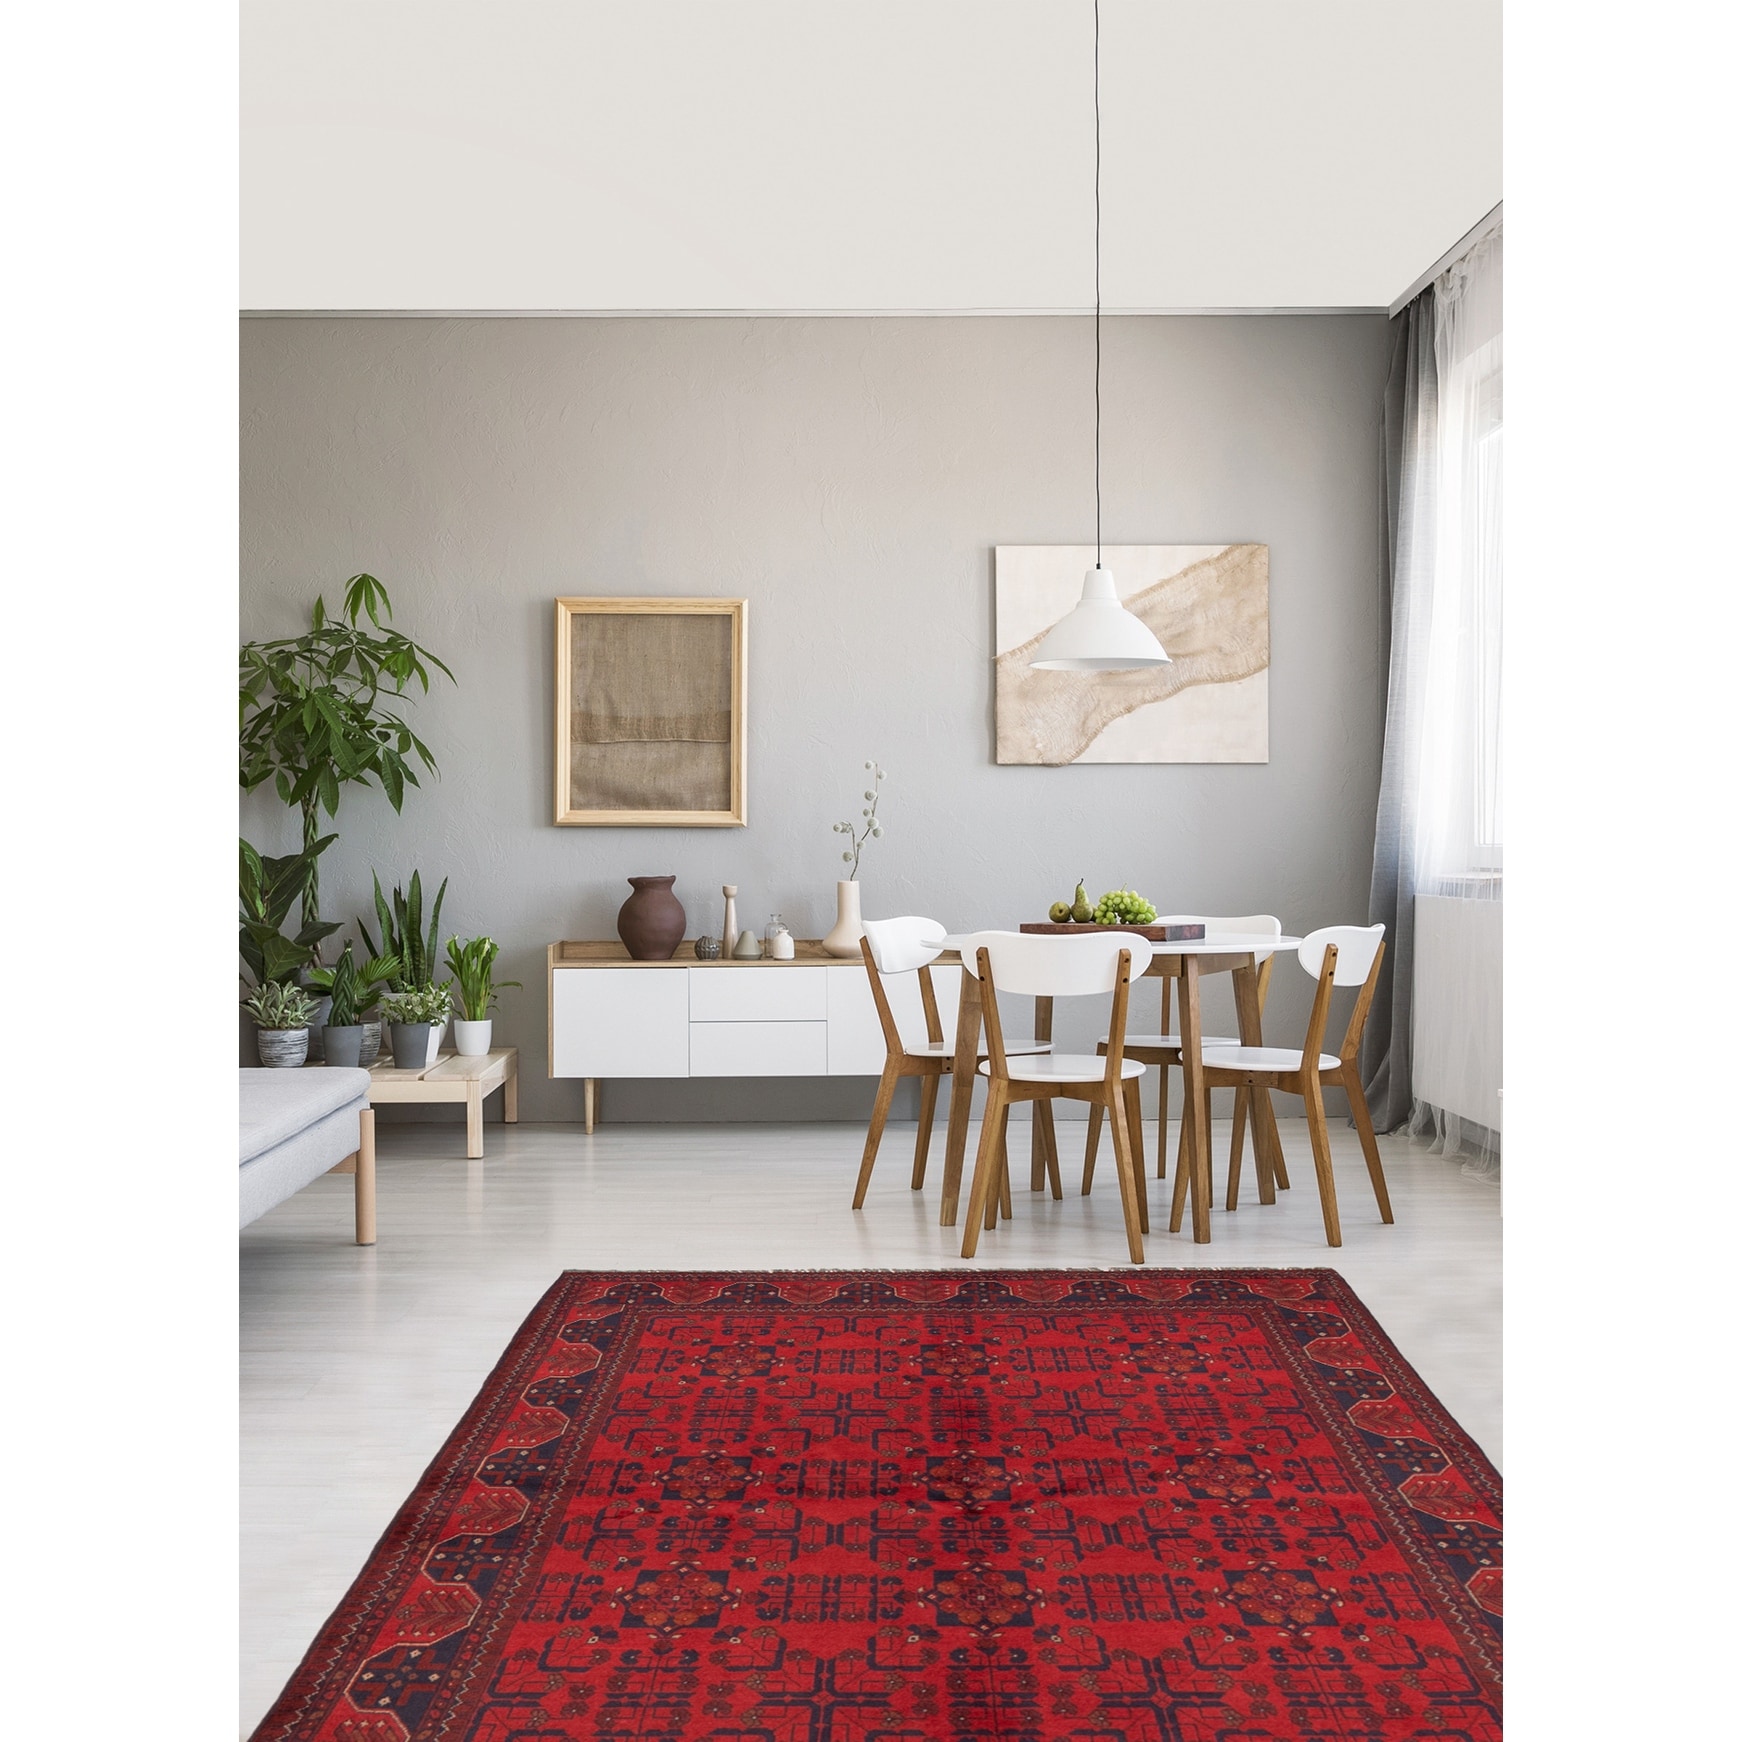 eCarpet Gallery Area Rug for Living Room Bedroom Finest Khal Mohammadi Bordered Red Rug 5'9 x 7'5 Hand-Knotted Wool Rug 360377 